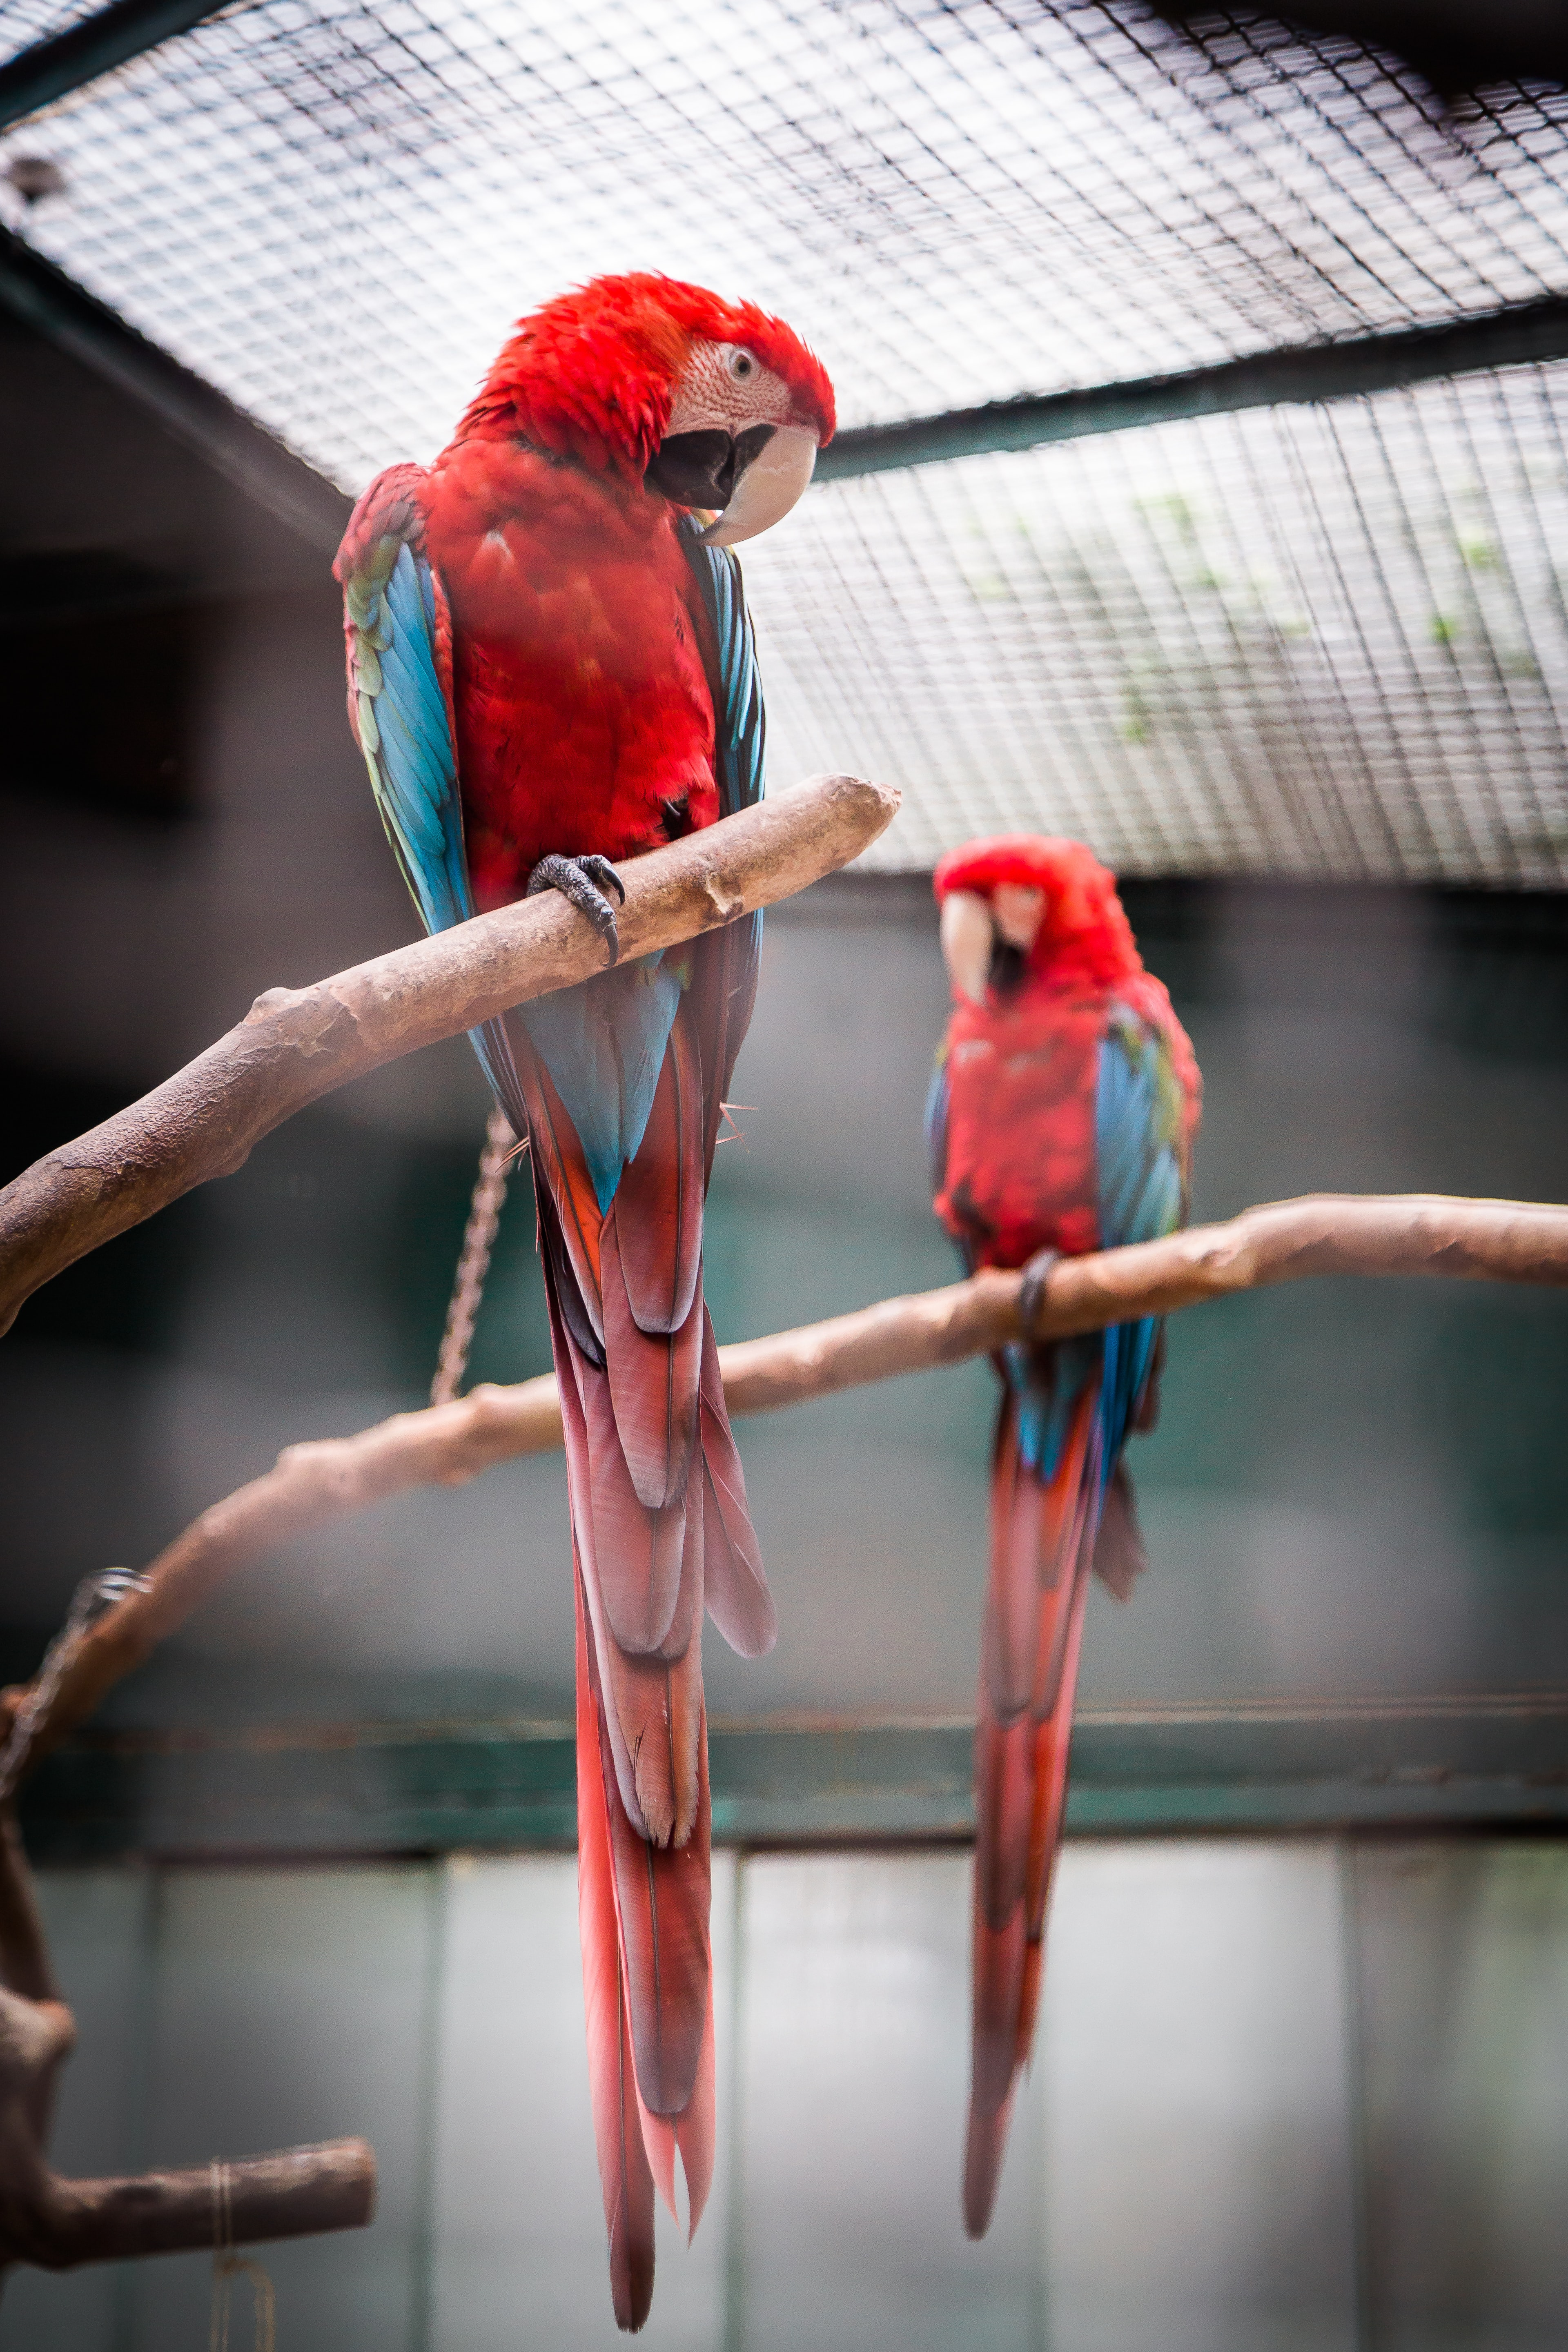 Two Scarlet Macaws sitting on two natural branch perches